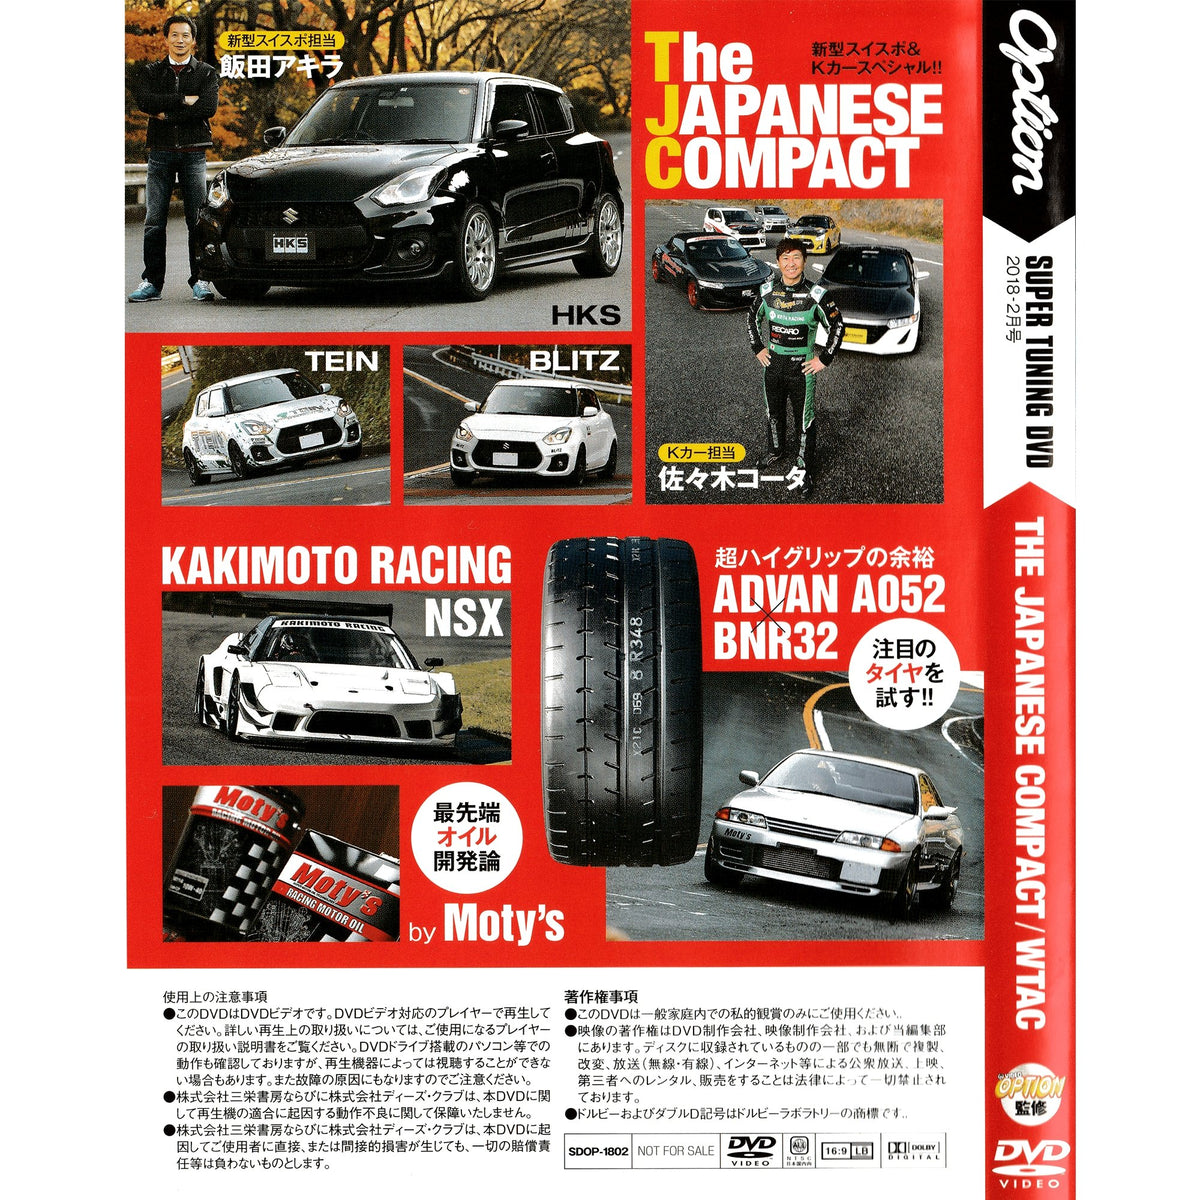 JDM Vintage Option Super Tuning Video DVD The Japanese Compact WTAC - Sugoi JDM